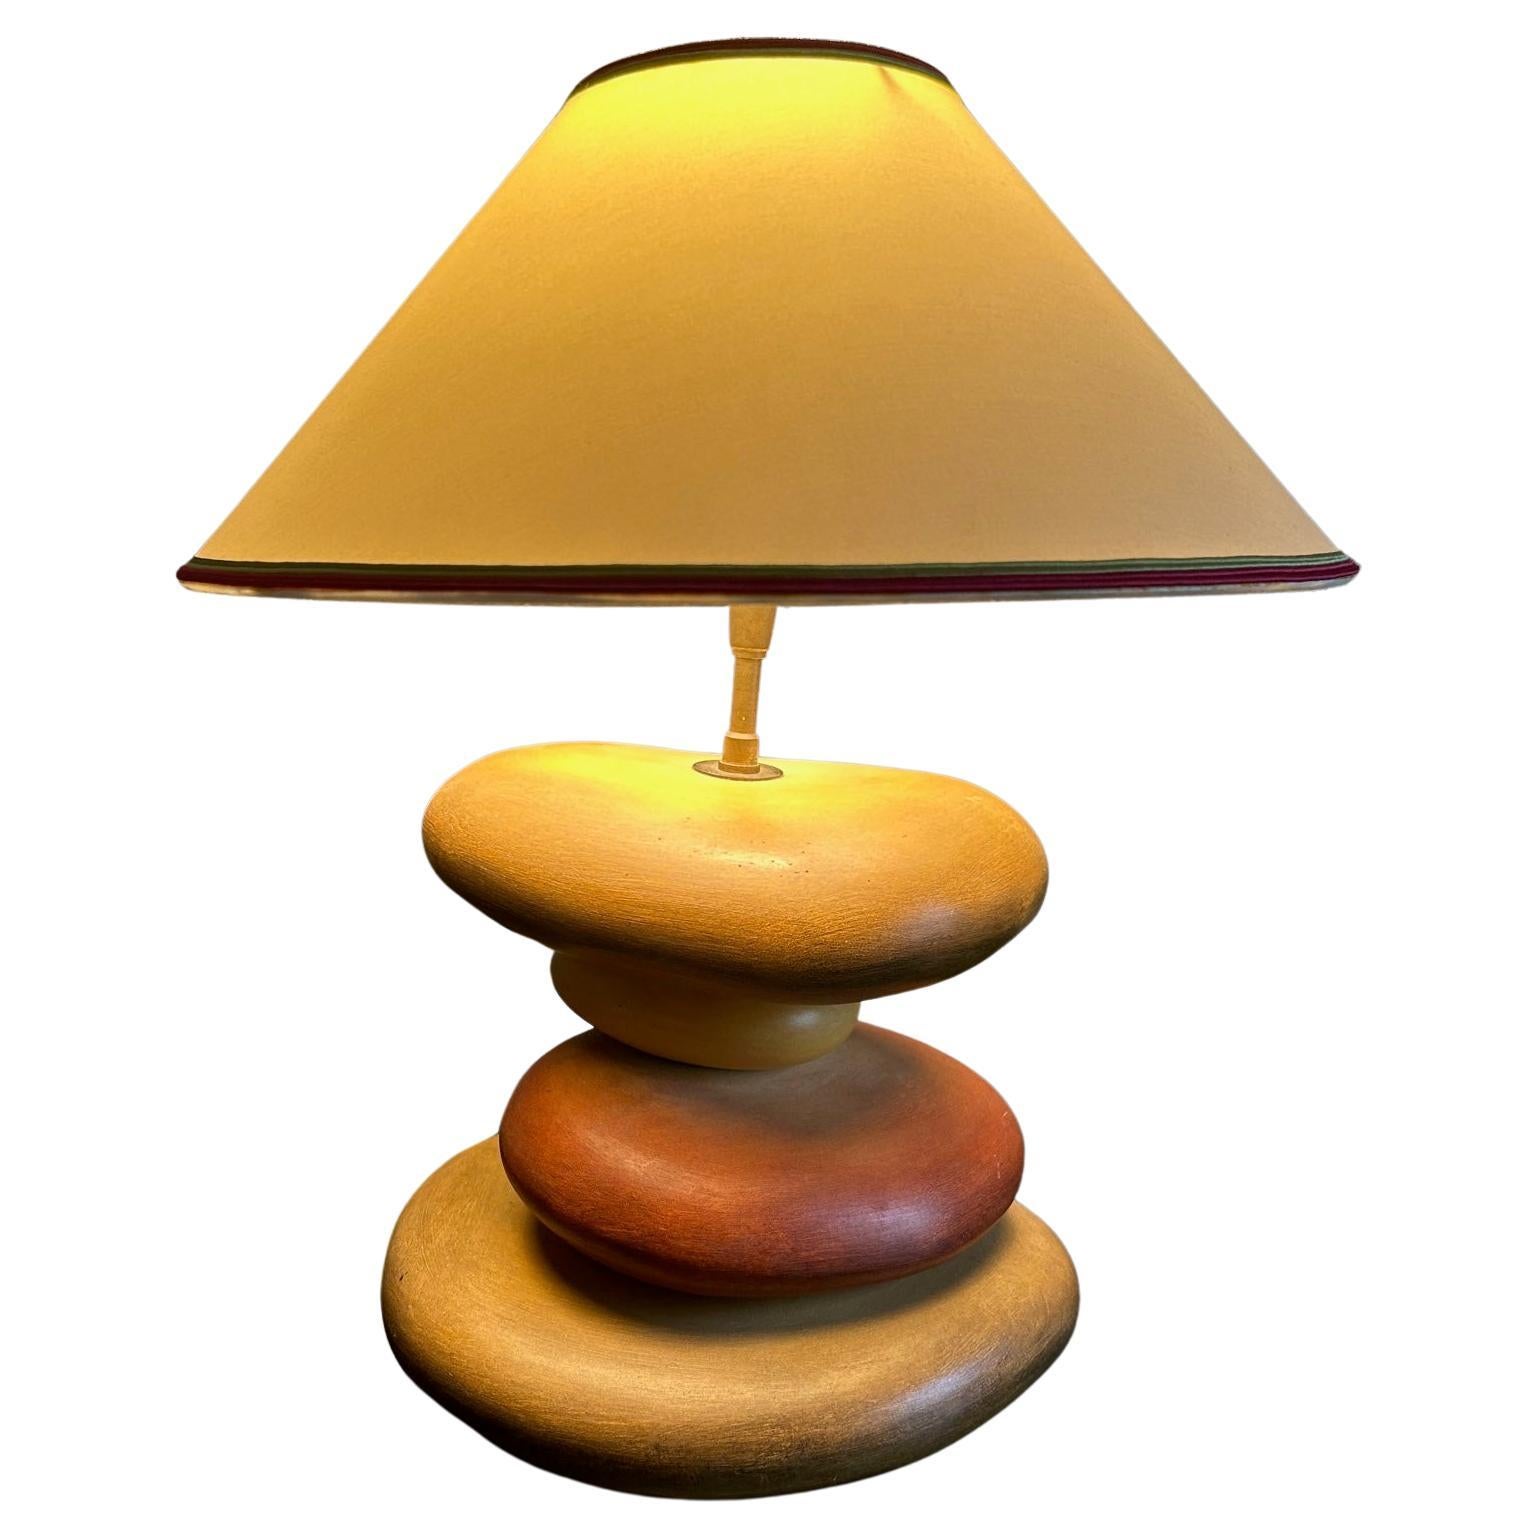 Unusual warm shades for this gorgeous ceramic lamp designed by François Châtain in the 1980's, France.